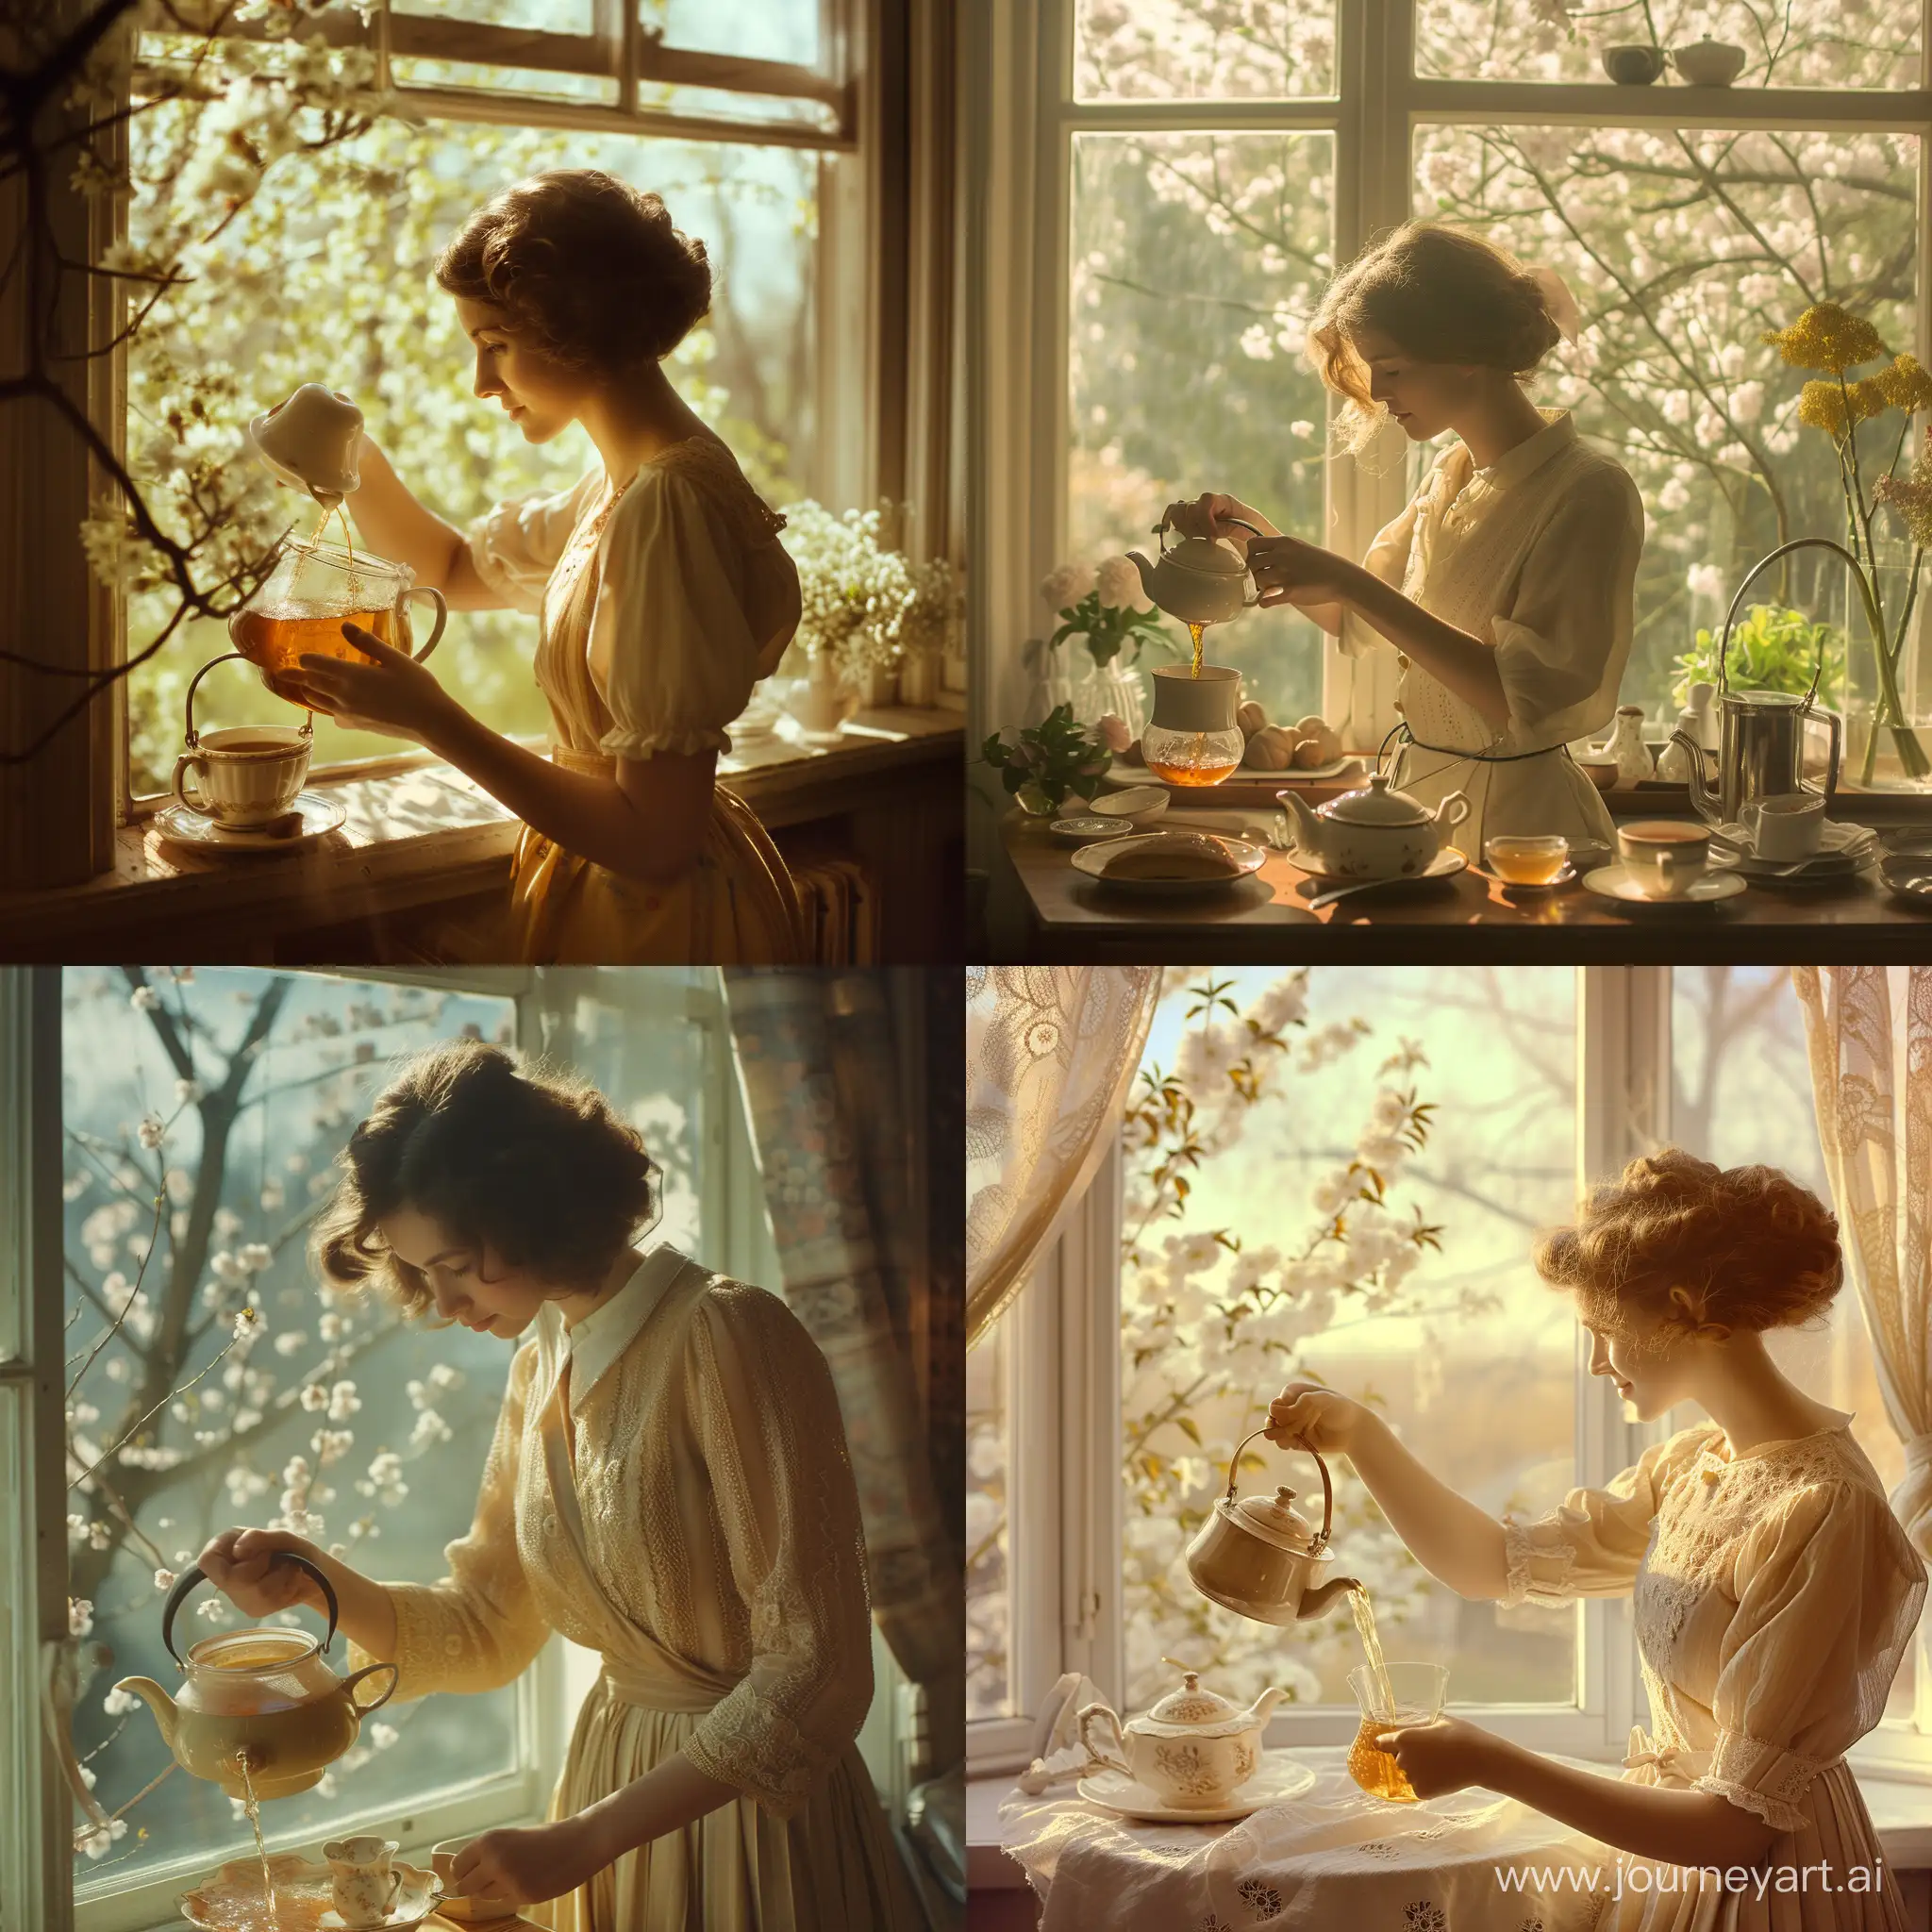 In a vintage atmosphere, a French citizen of the 30s was pouring tea from a teapot. A warm morning atmosphere, where the sun shone and the trees bloomed outside the window
